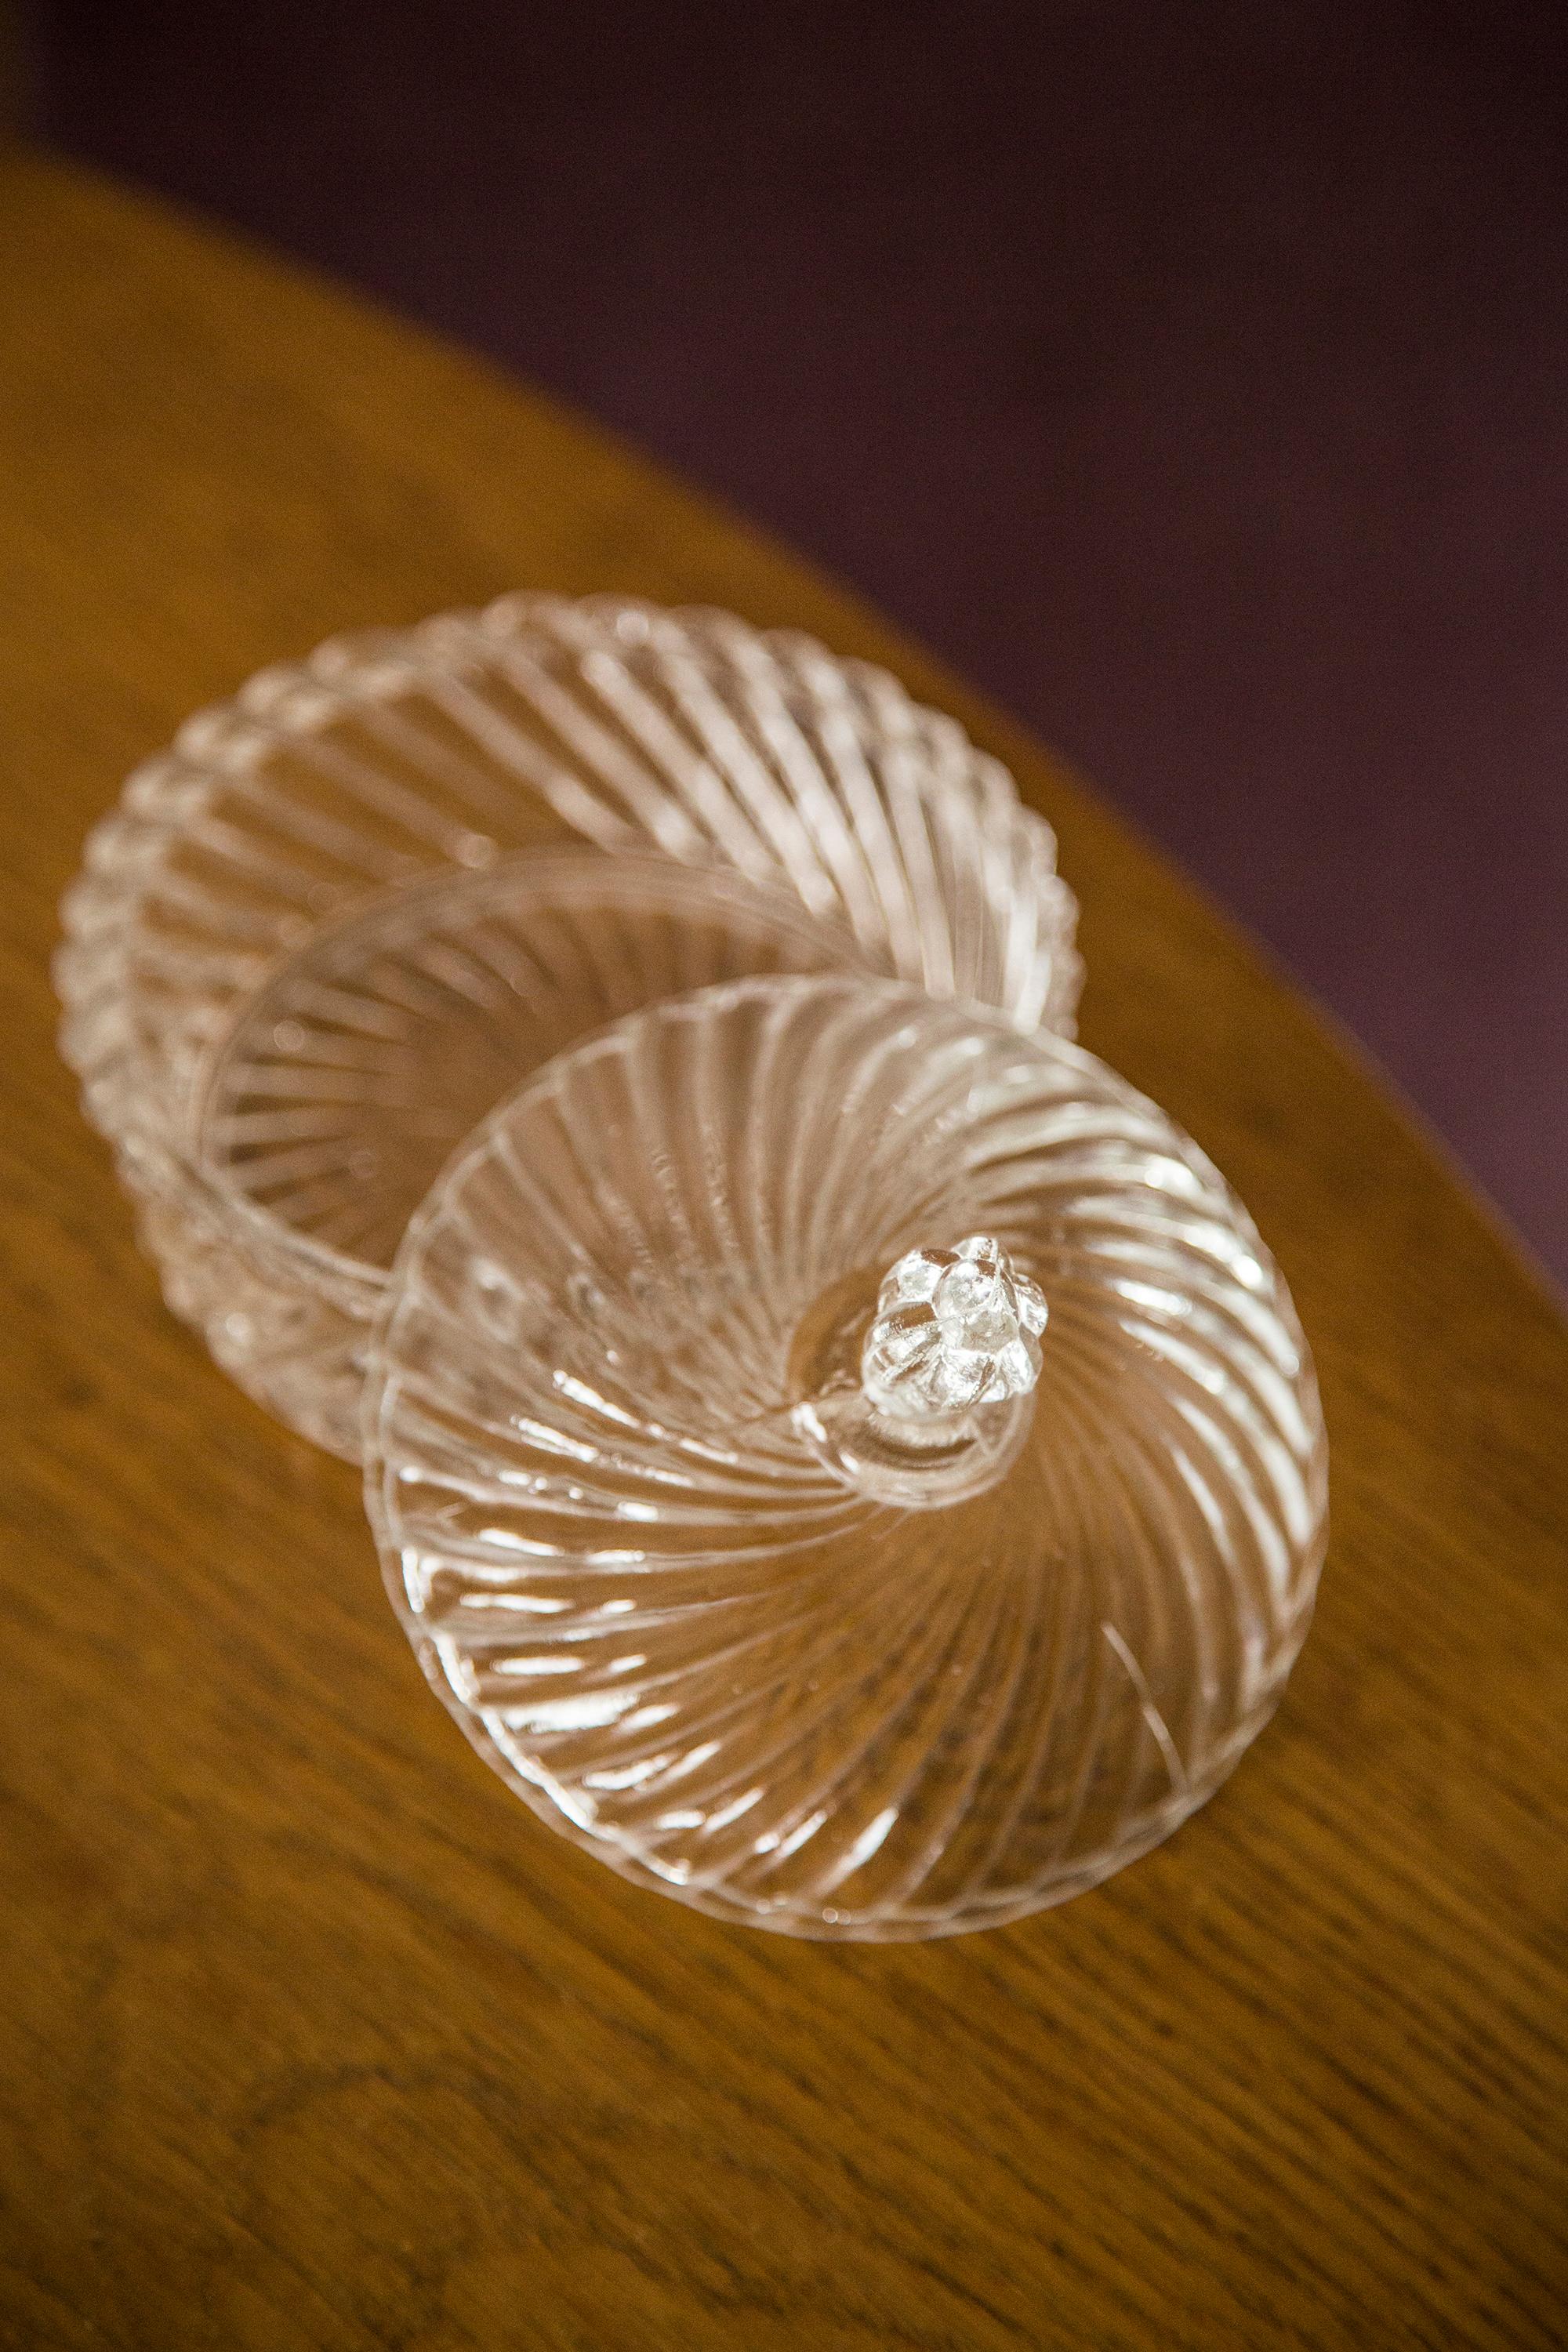 Mid-Century Modern Midcentury Vintage Transparent Crystal Glass Sugar Bowl, Italy, 1960s For Sale